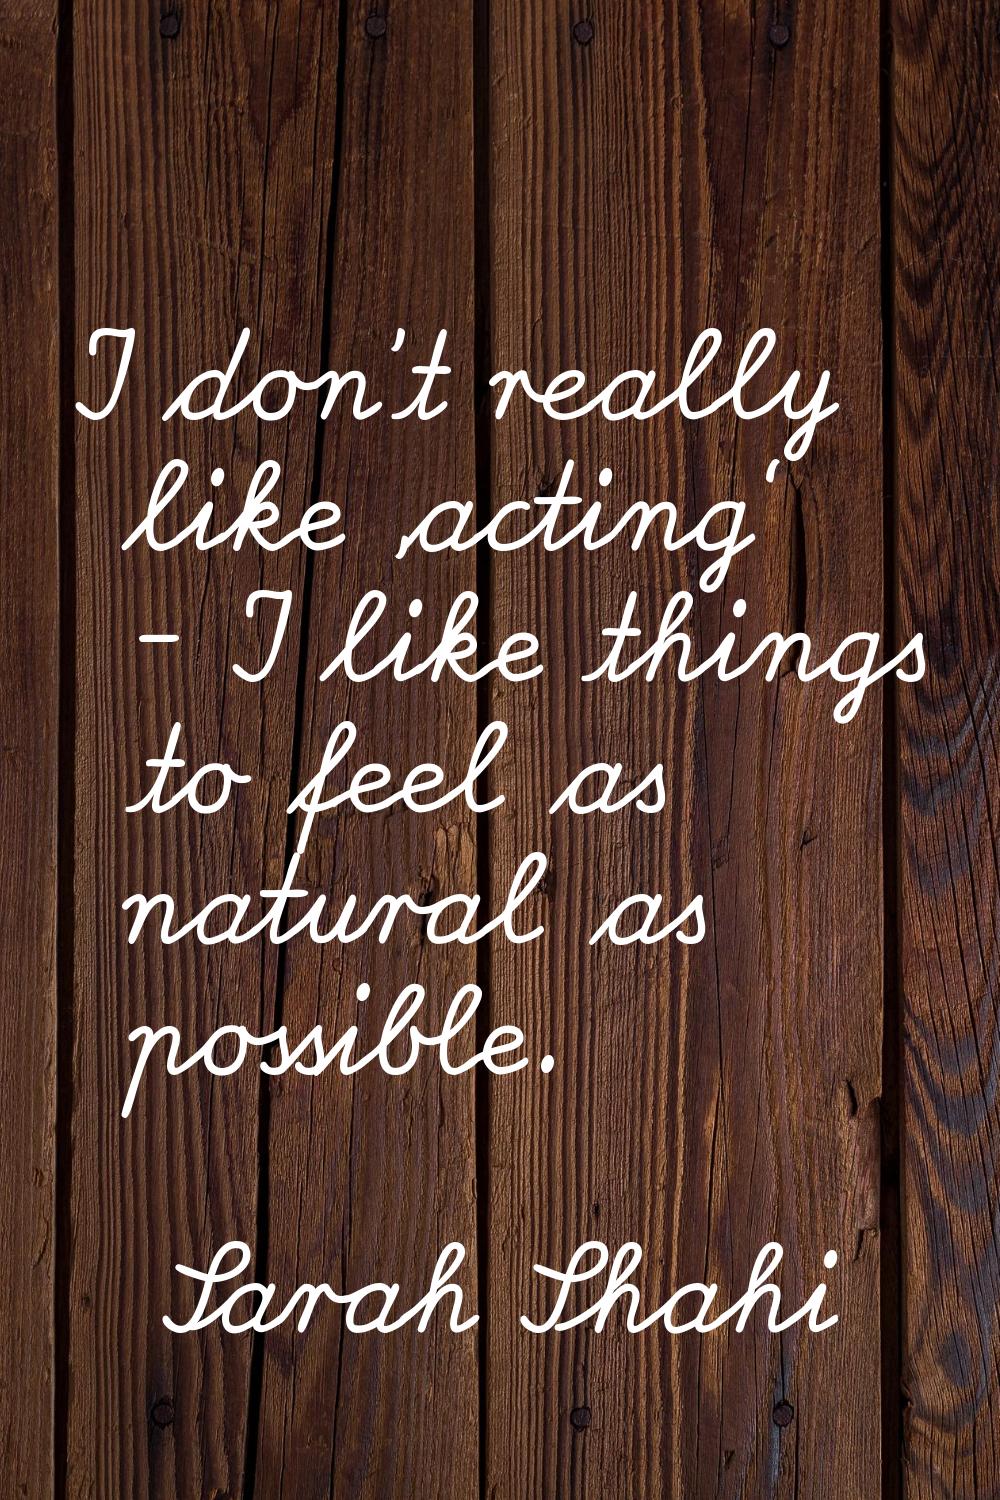 I don't really like 'acting' - I like things to feel as natural as possible.